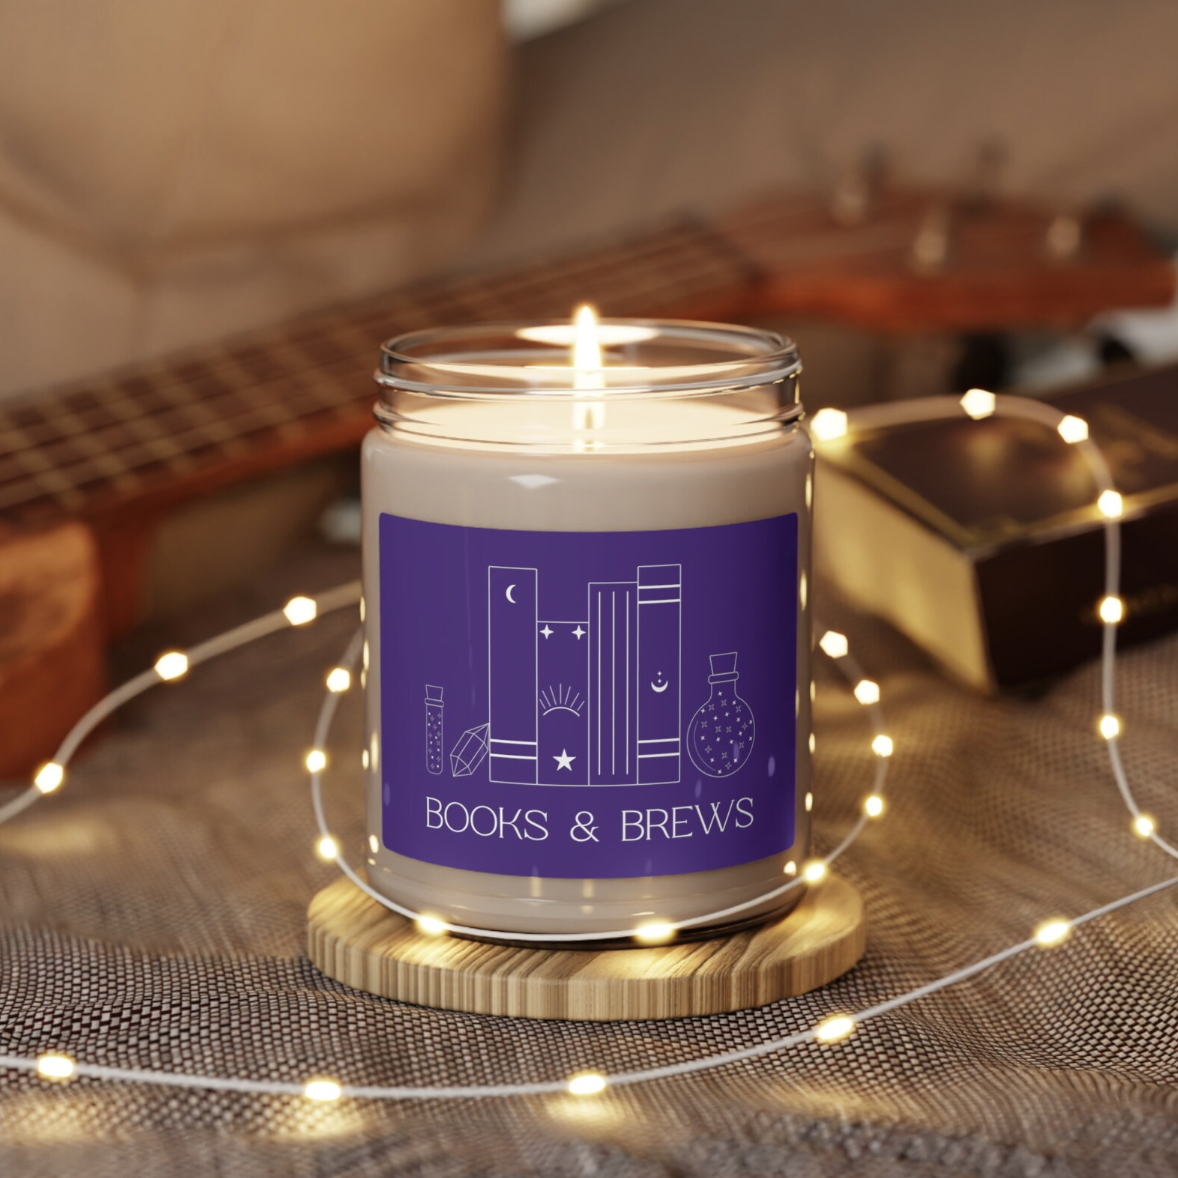 A candle in a jar with a purple label that says "Books & Brews" with an illustration of several books